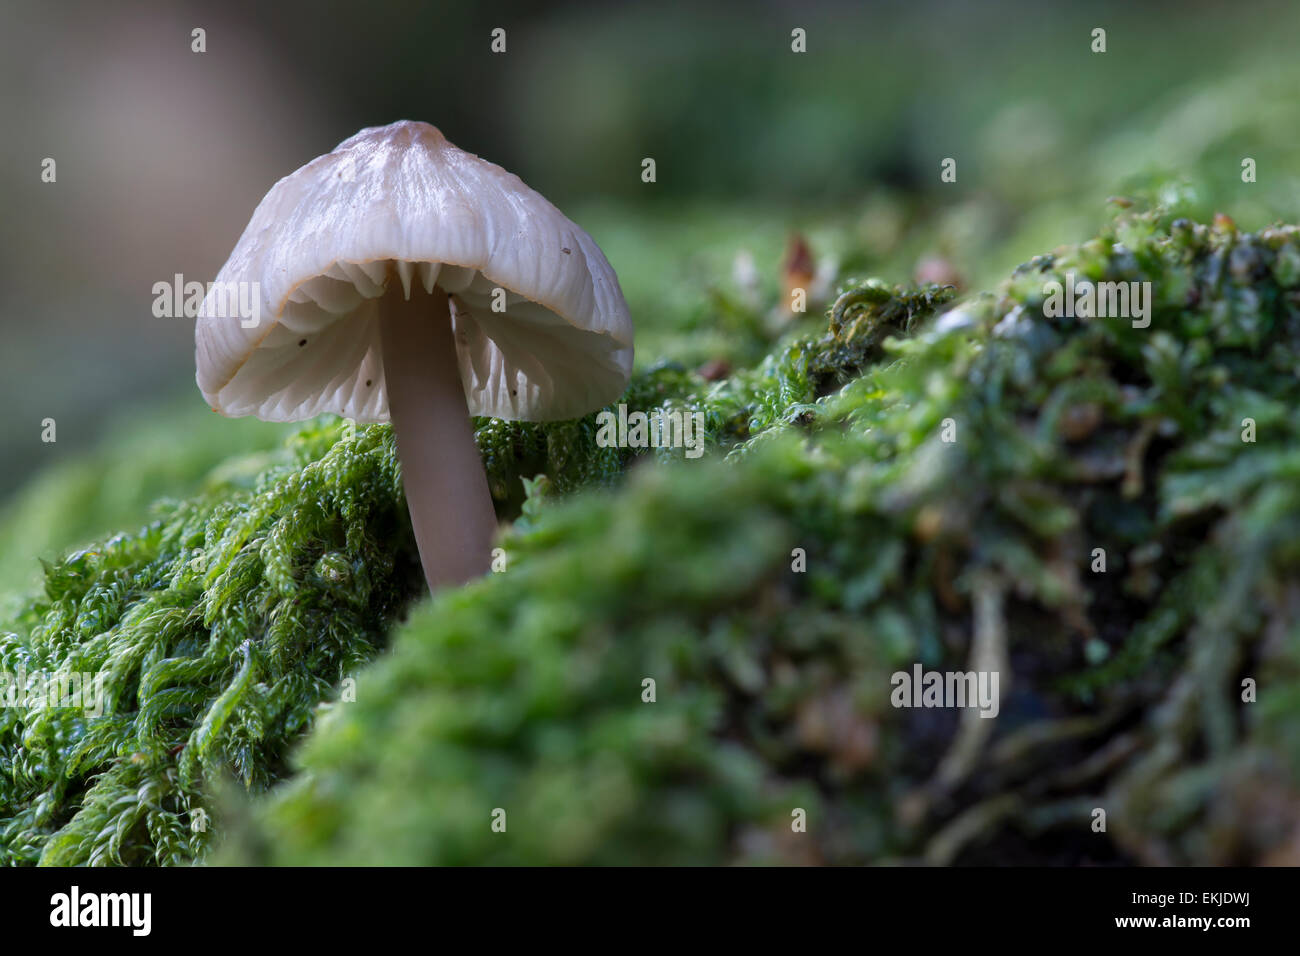 A lone, small pale delicate mushroom on the floor of a Cumbrian forest on a bed of moss and clover. Stock Photo